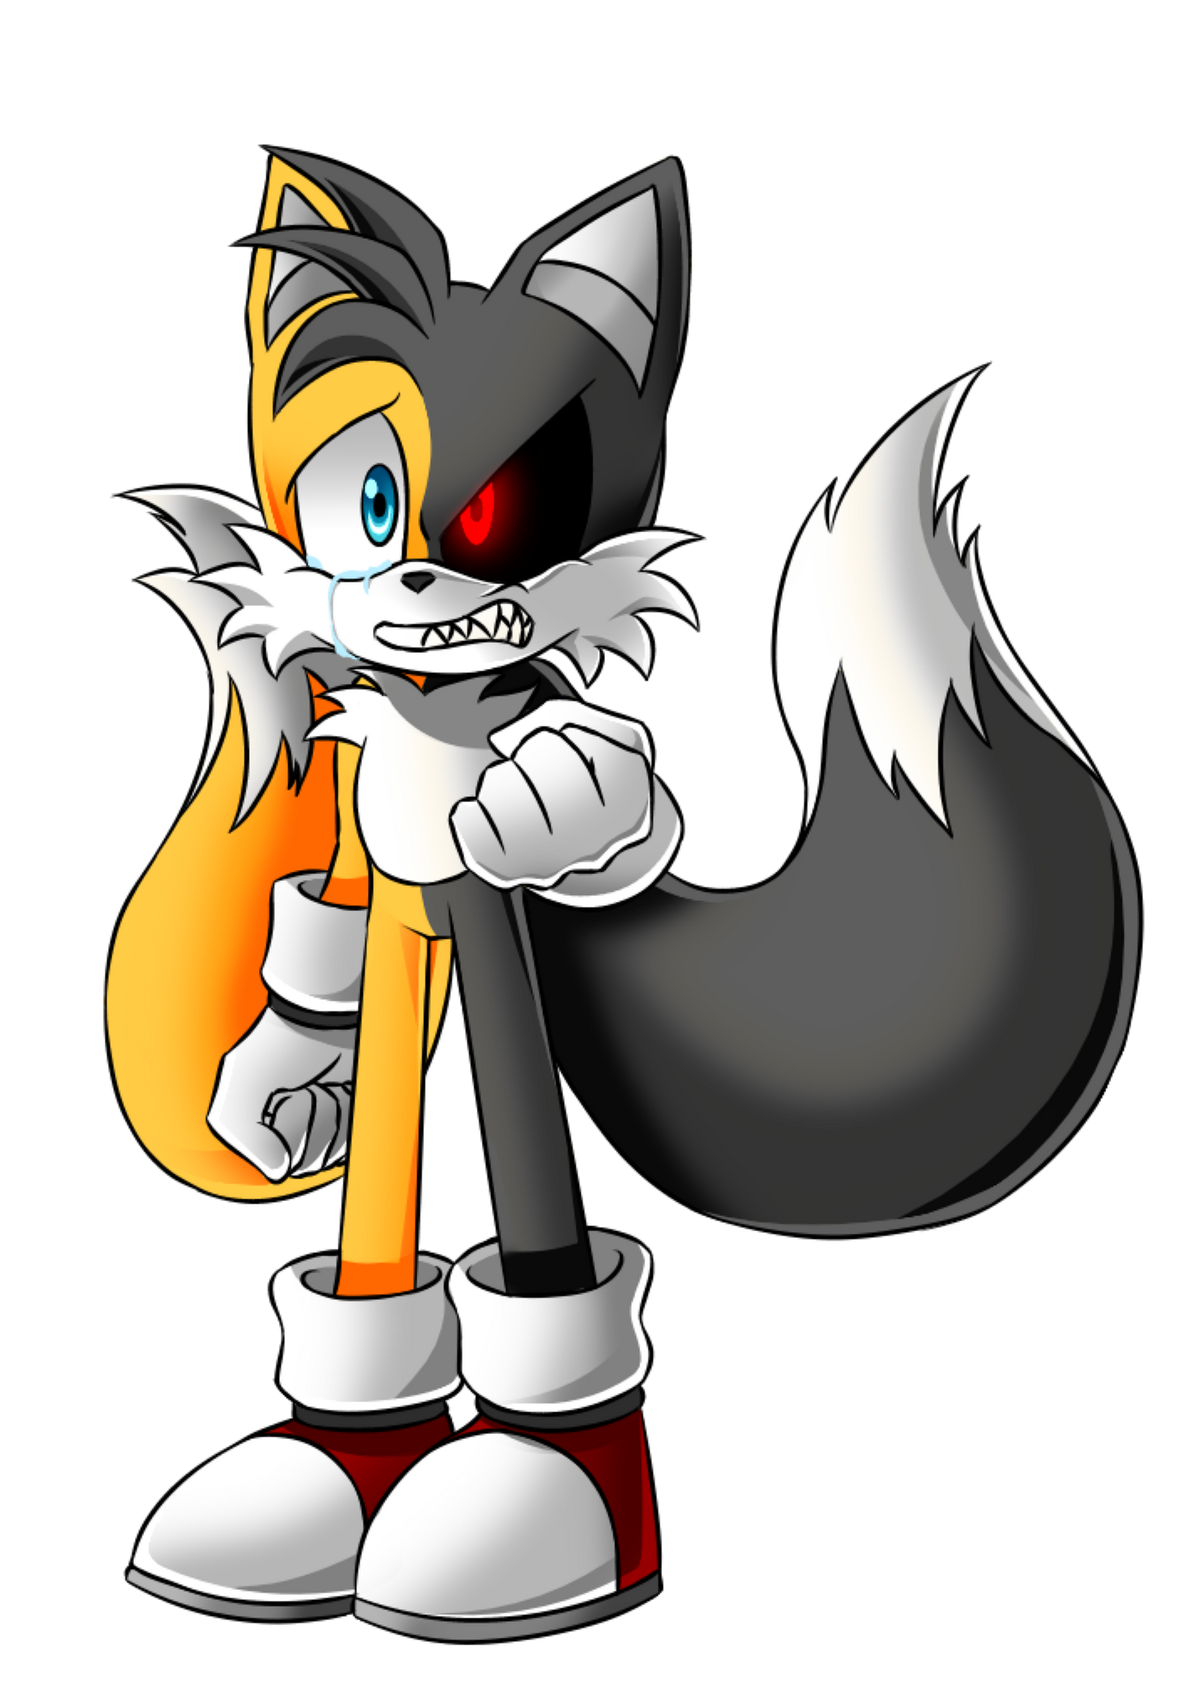 Sonic.exe end tails.exe (my version ╥﹏╥ ) Paint - Illustrations